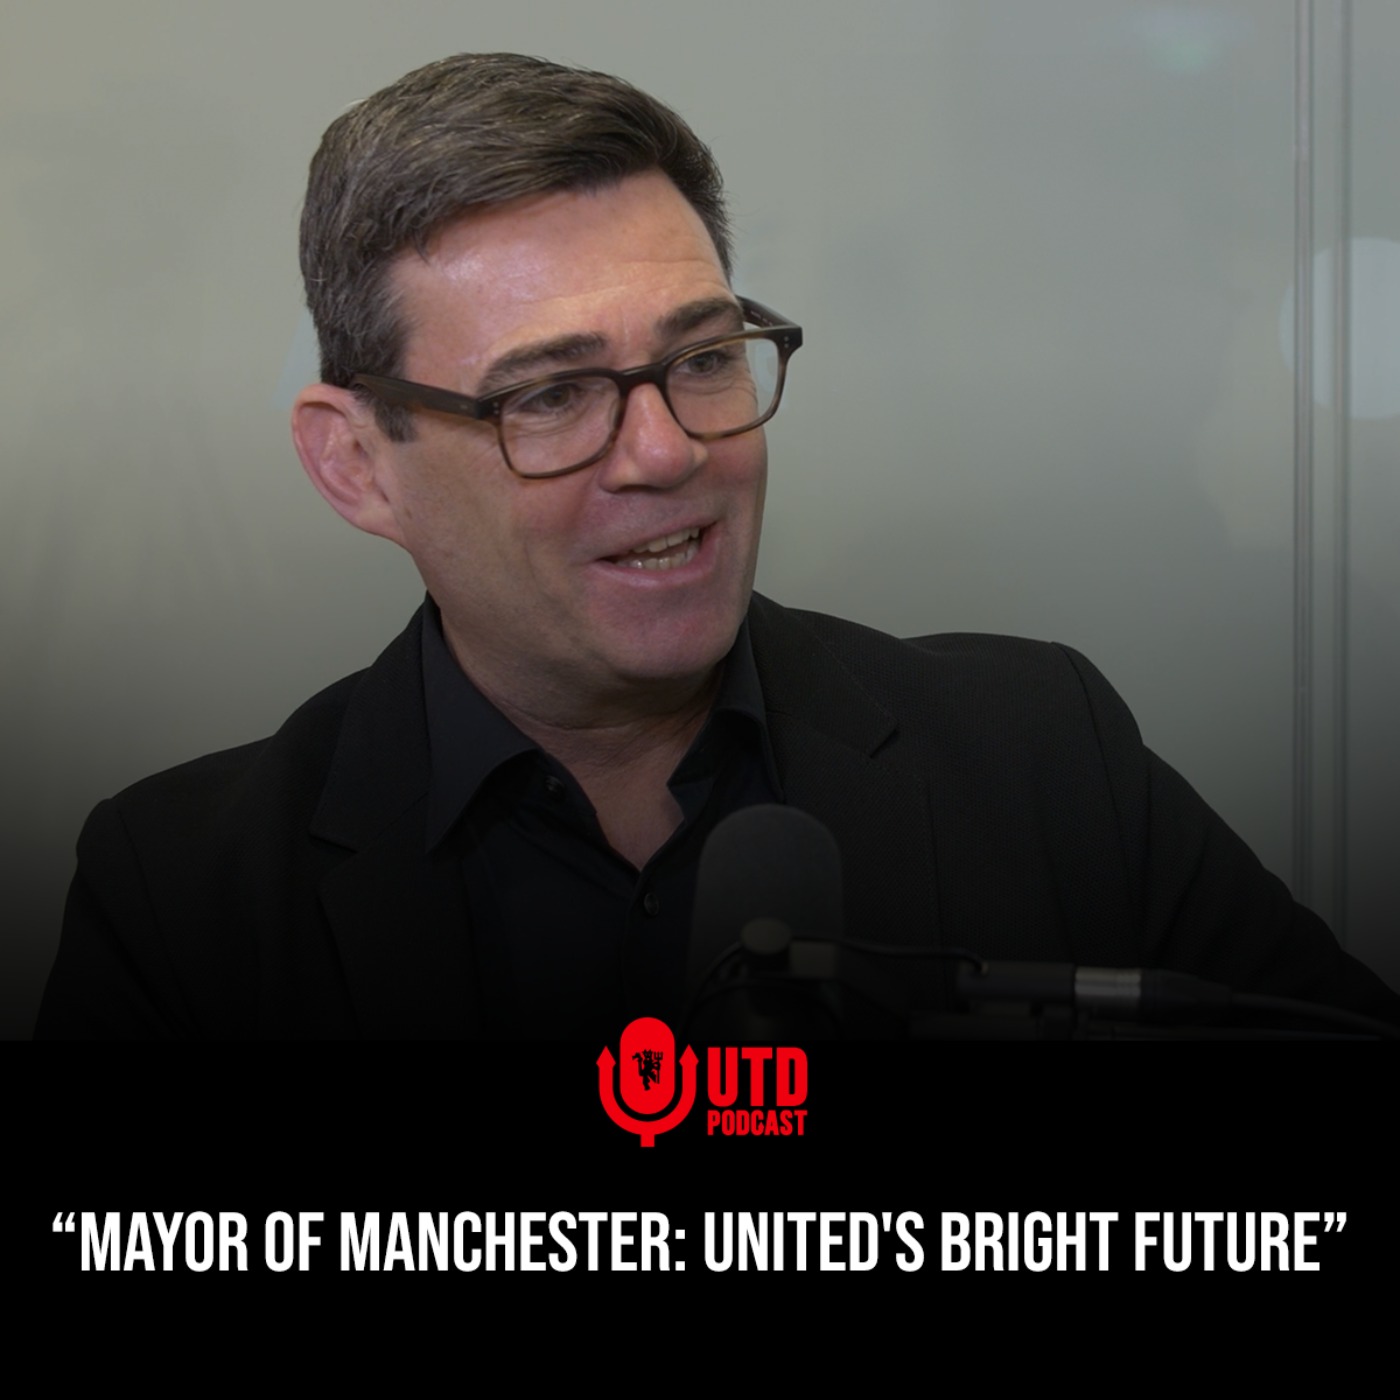 The Mayor of Manchester: United's Bright Future